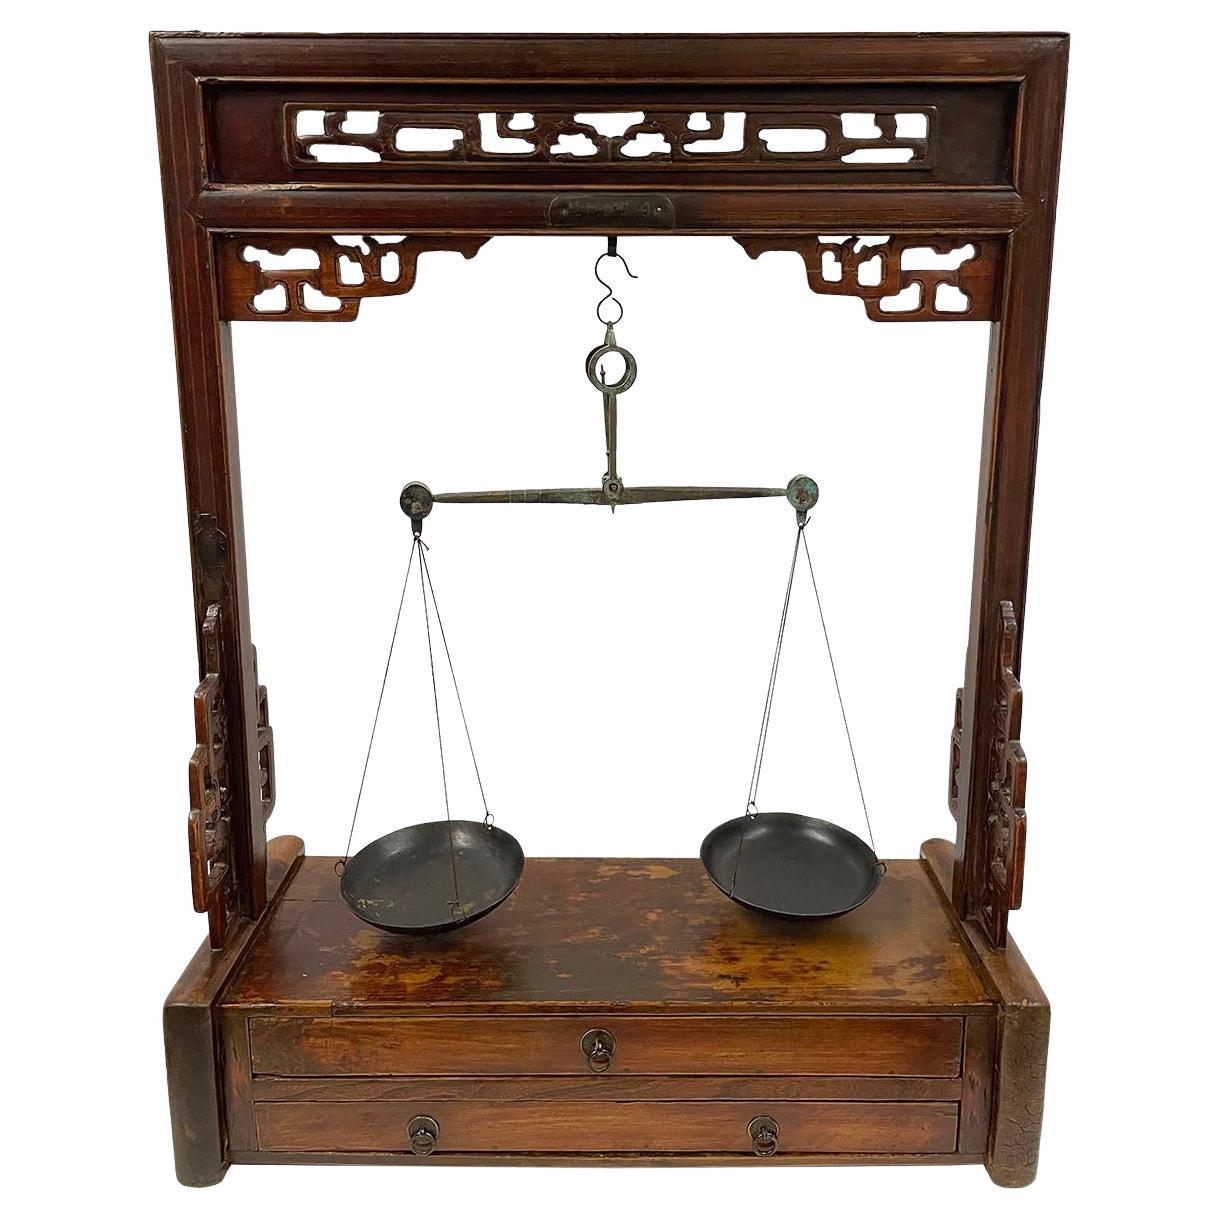 19th Century Antique Chinese Apothecary Balance Scale Stand with Weights